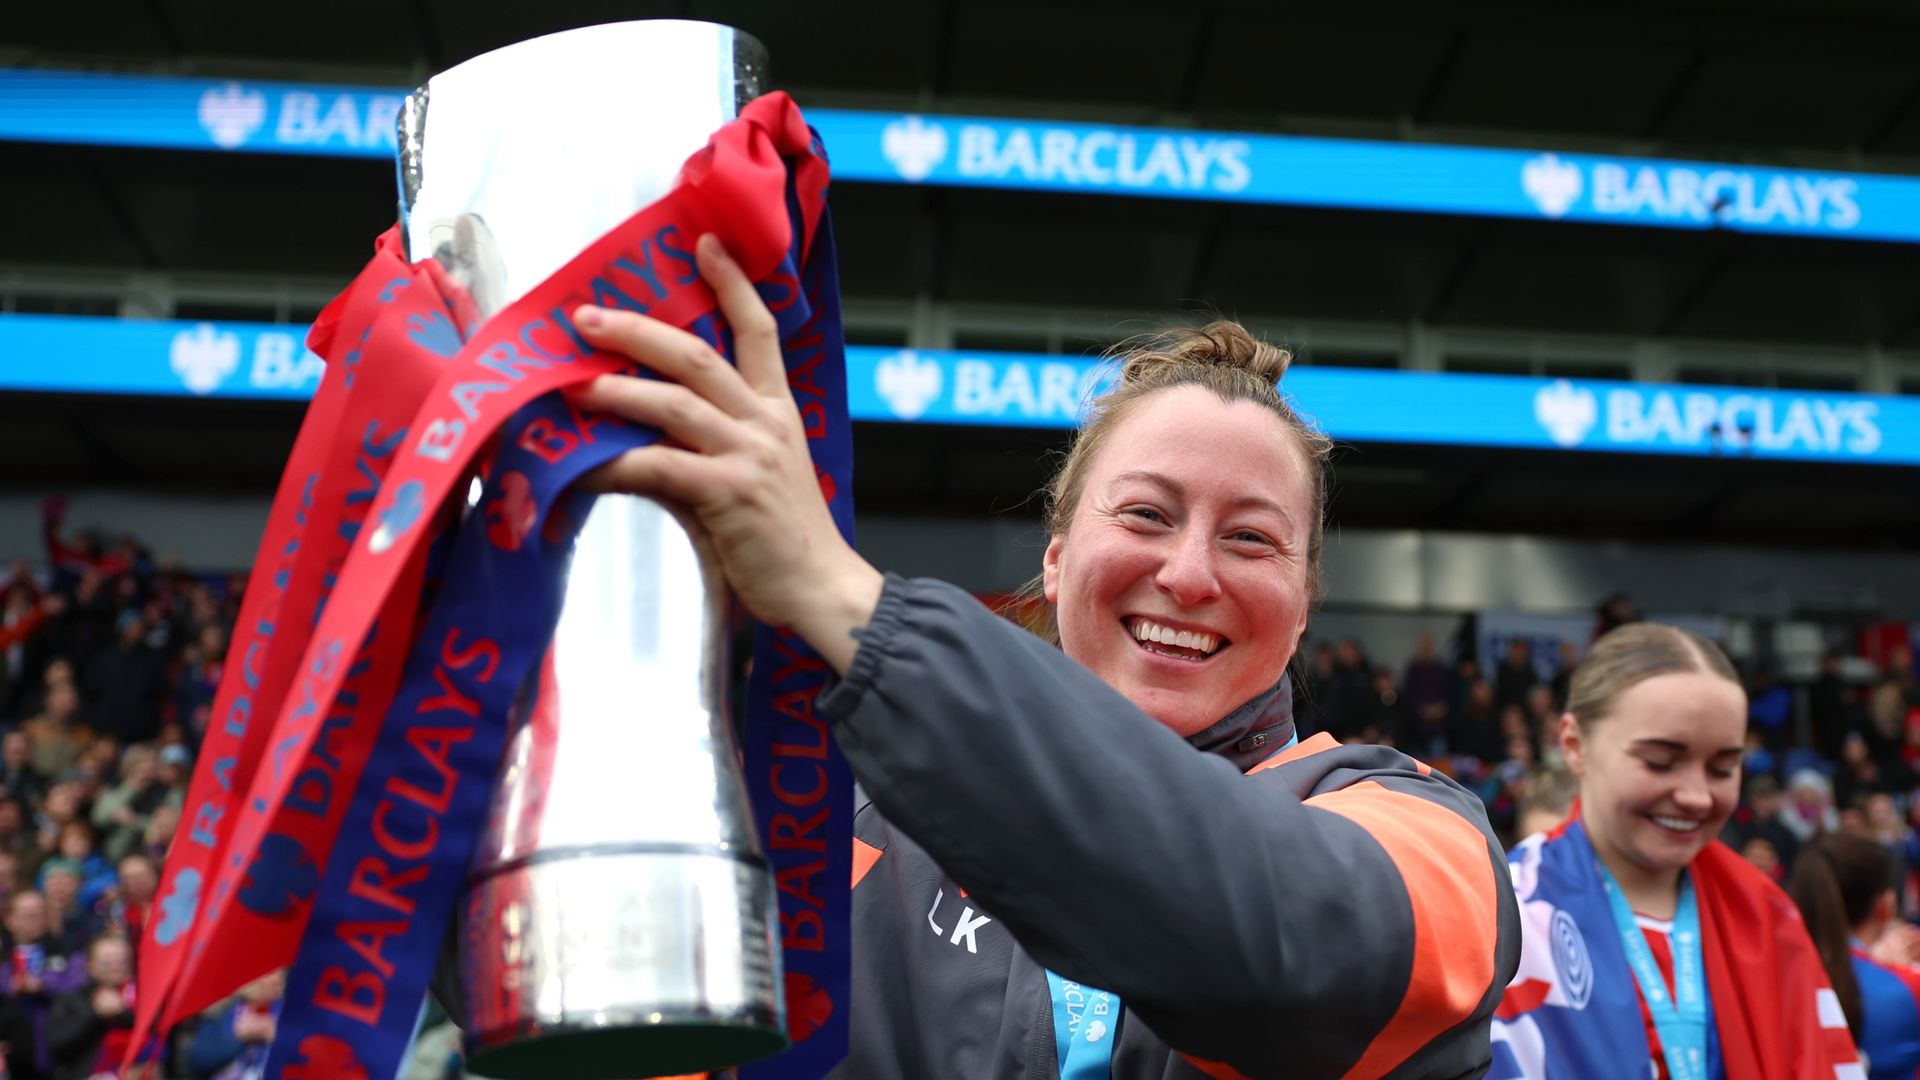 Crystal Palace Women: A football club rapidly on the rise